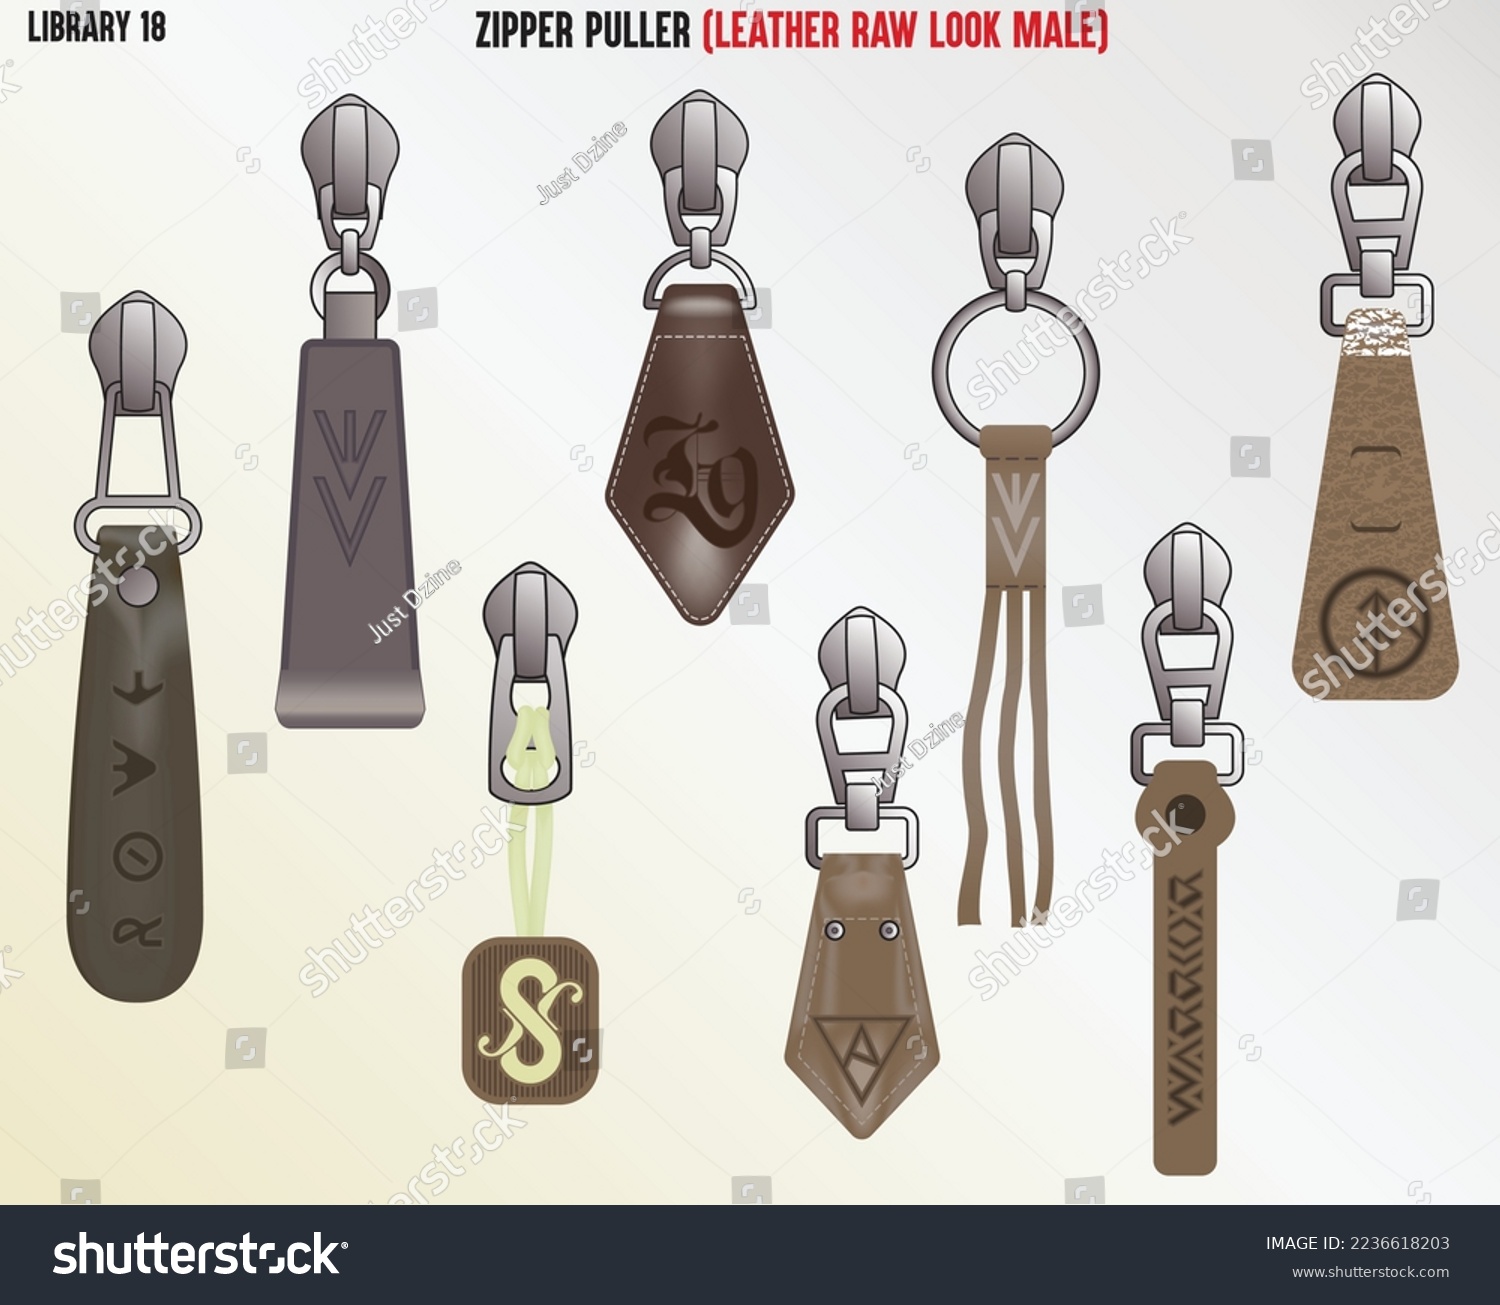 SVG of URBAN FASHION TREND ZIPPER PULLERS WITH LEATHER DESIGNS FOR YOUNG MEN AND BOYS IN VECTOR SKETCH svg